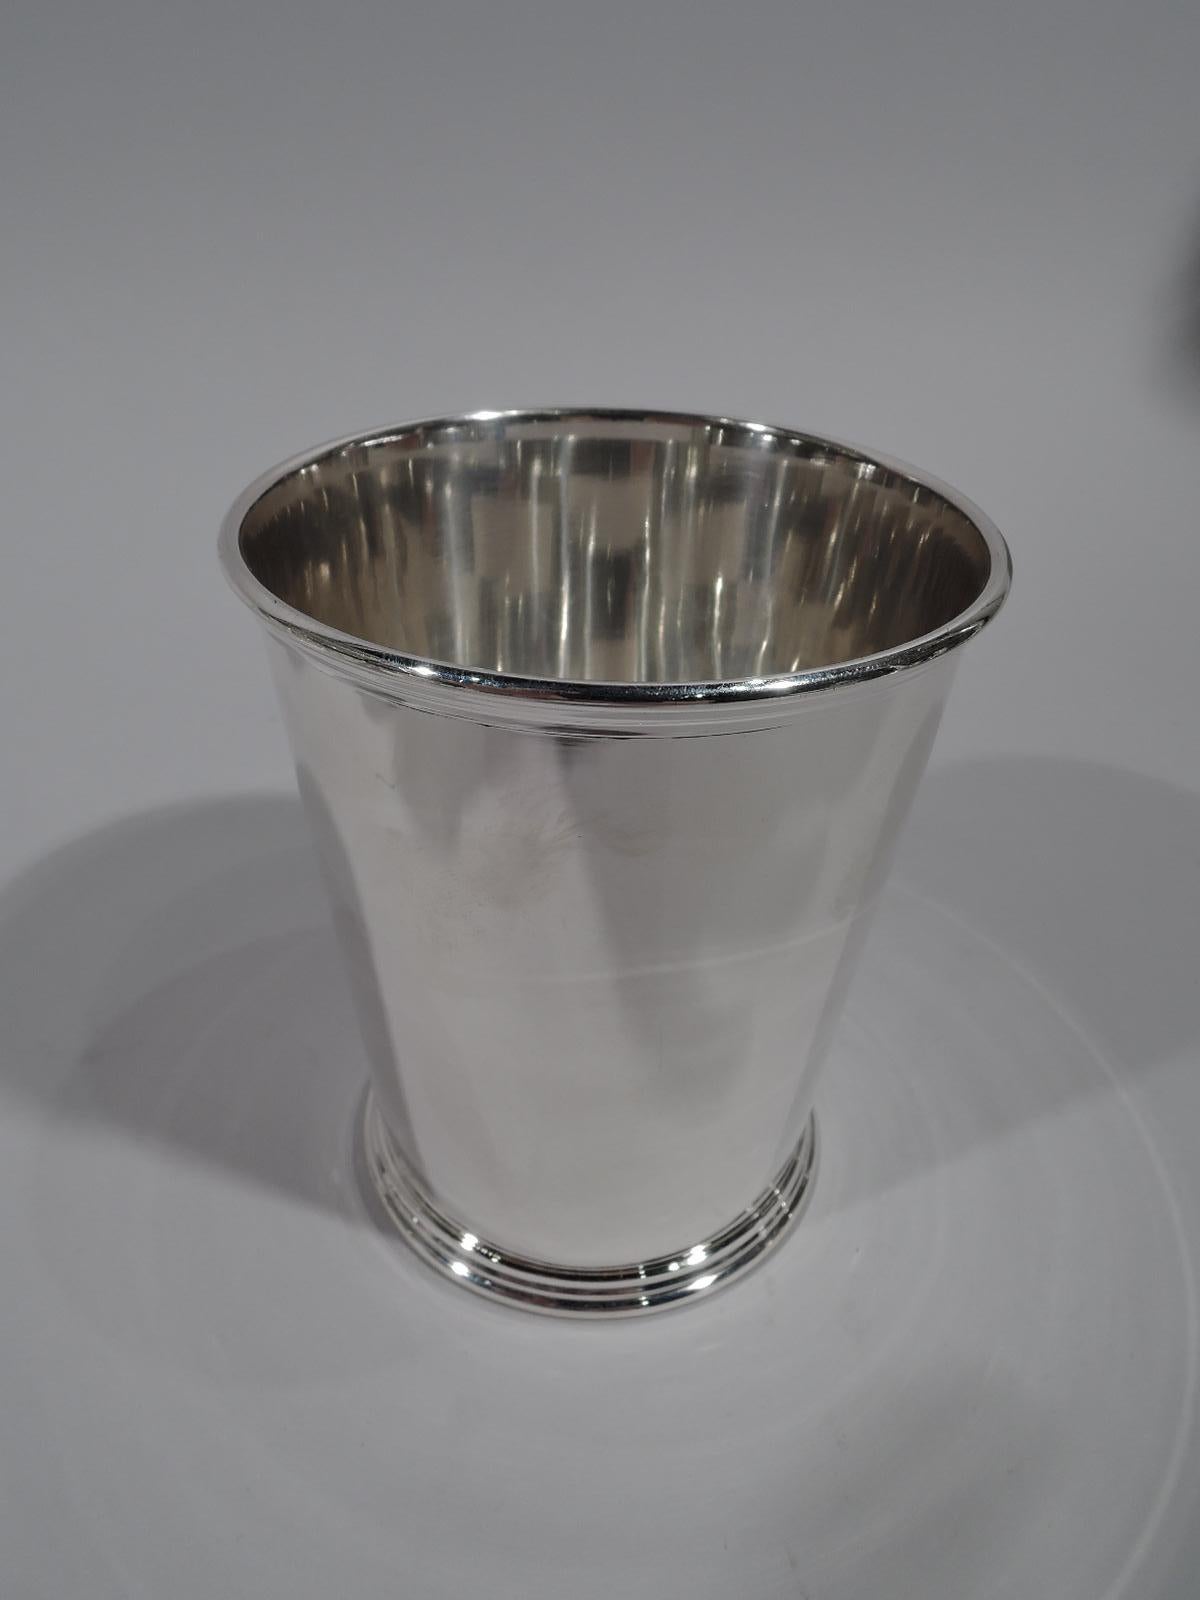 Set of 6 sterling silver mint julep cups. Made by S. Kirk & Son in Baltimore. Each: Straight and tapering sides, molded rim, and tapering sides. Fully marked including maker’s stamp (1932-61) and no. 277. Total weight: 24 troy ounces.